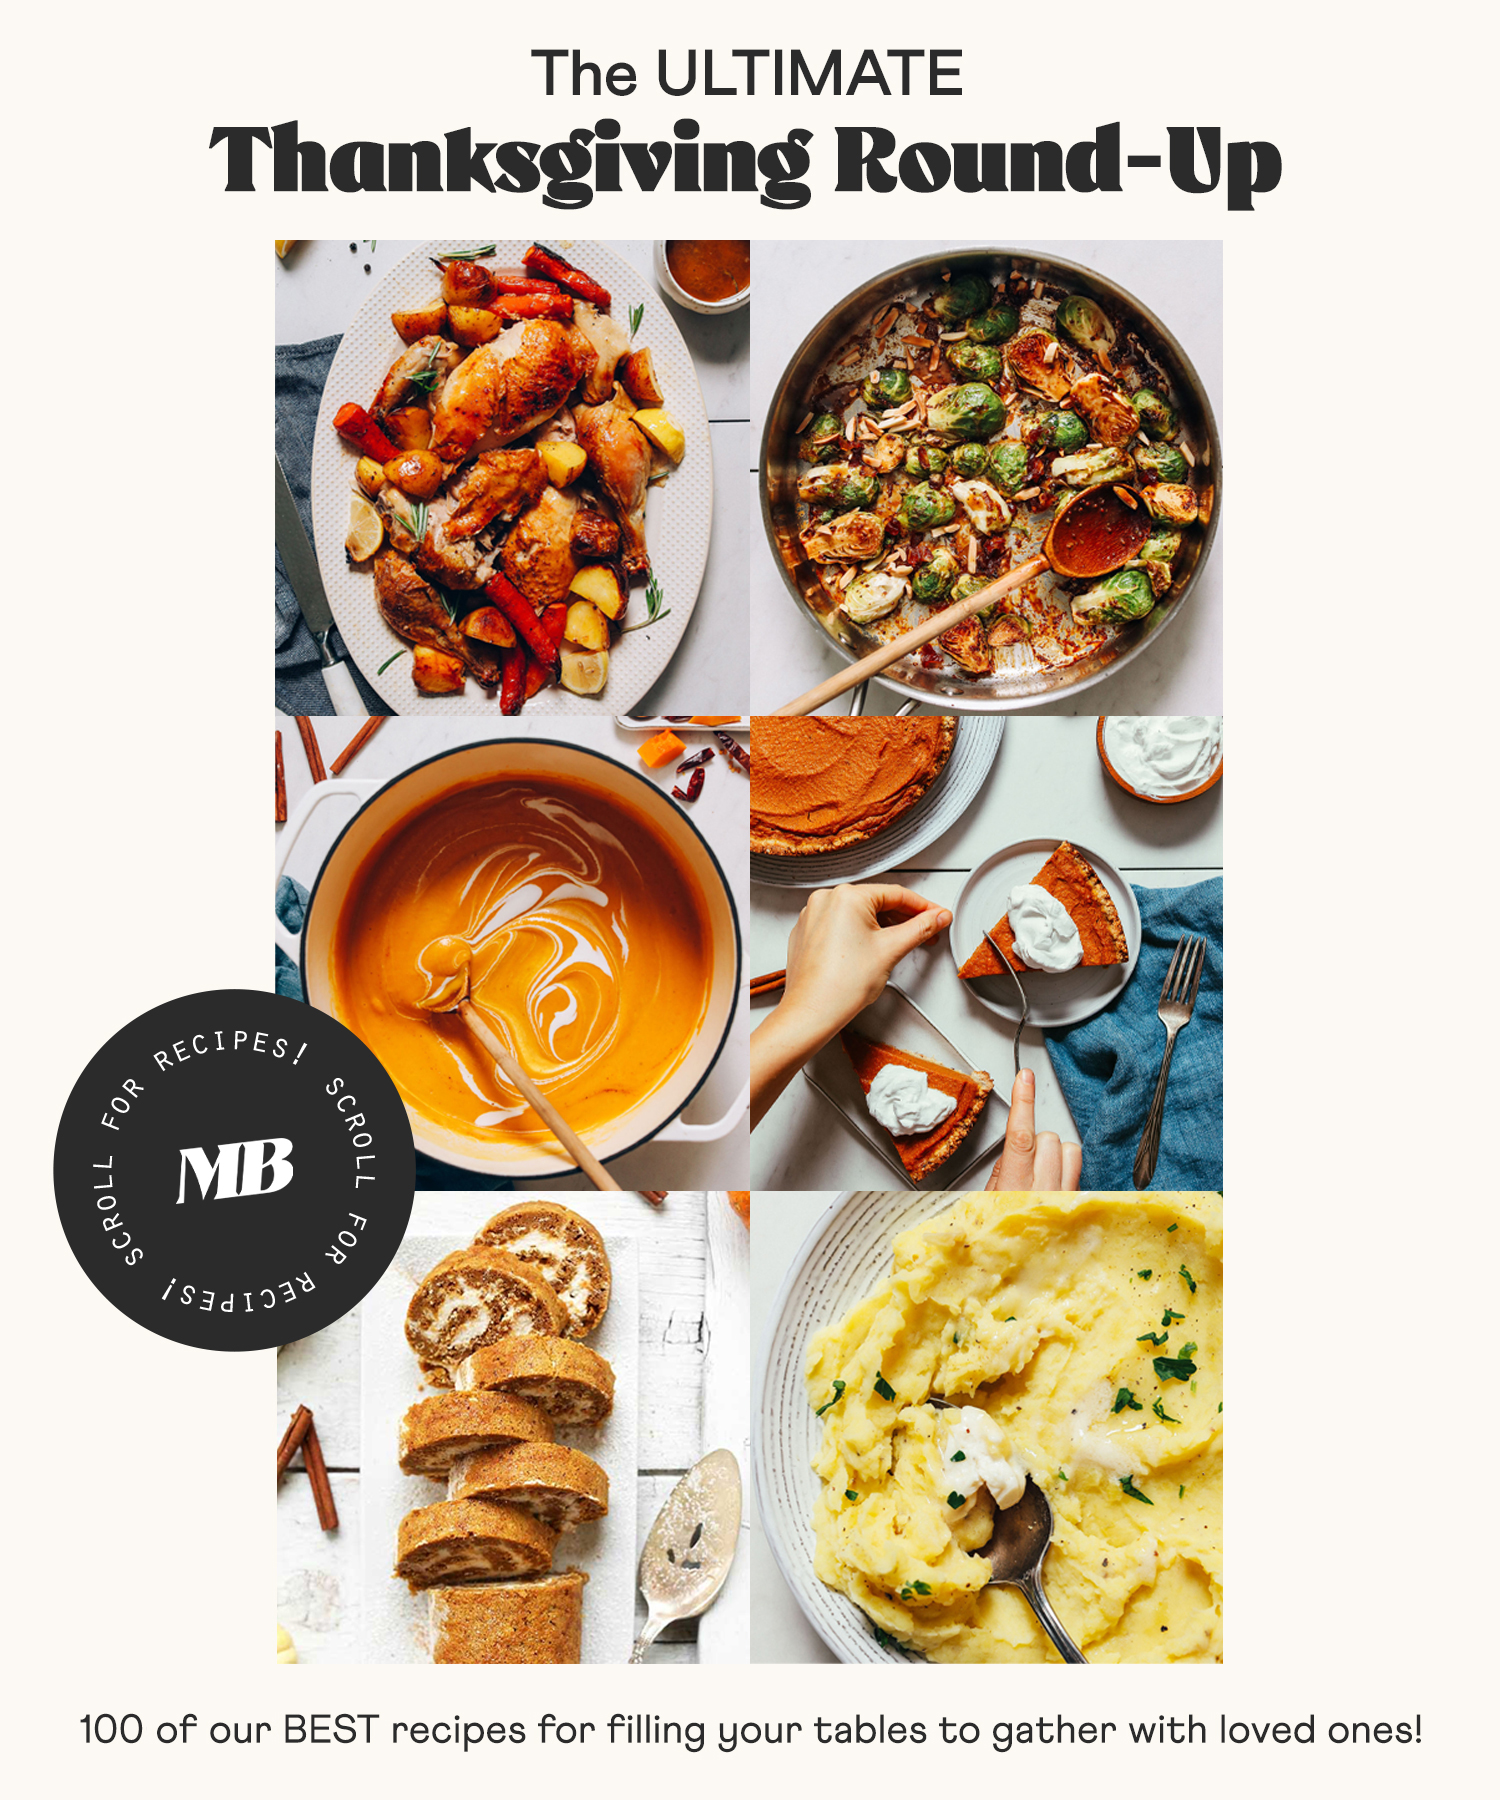 The ULTIMATE Thanksgiving Recipe Round-Up - Minimalist Baker